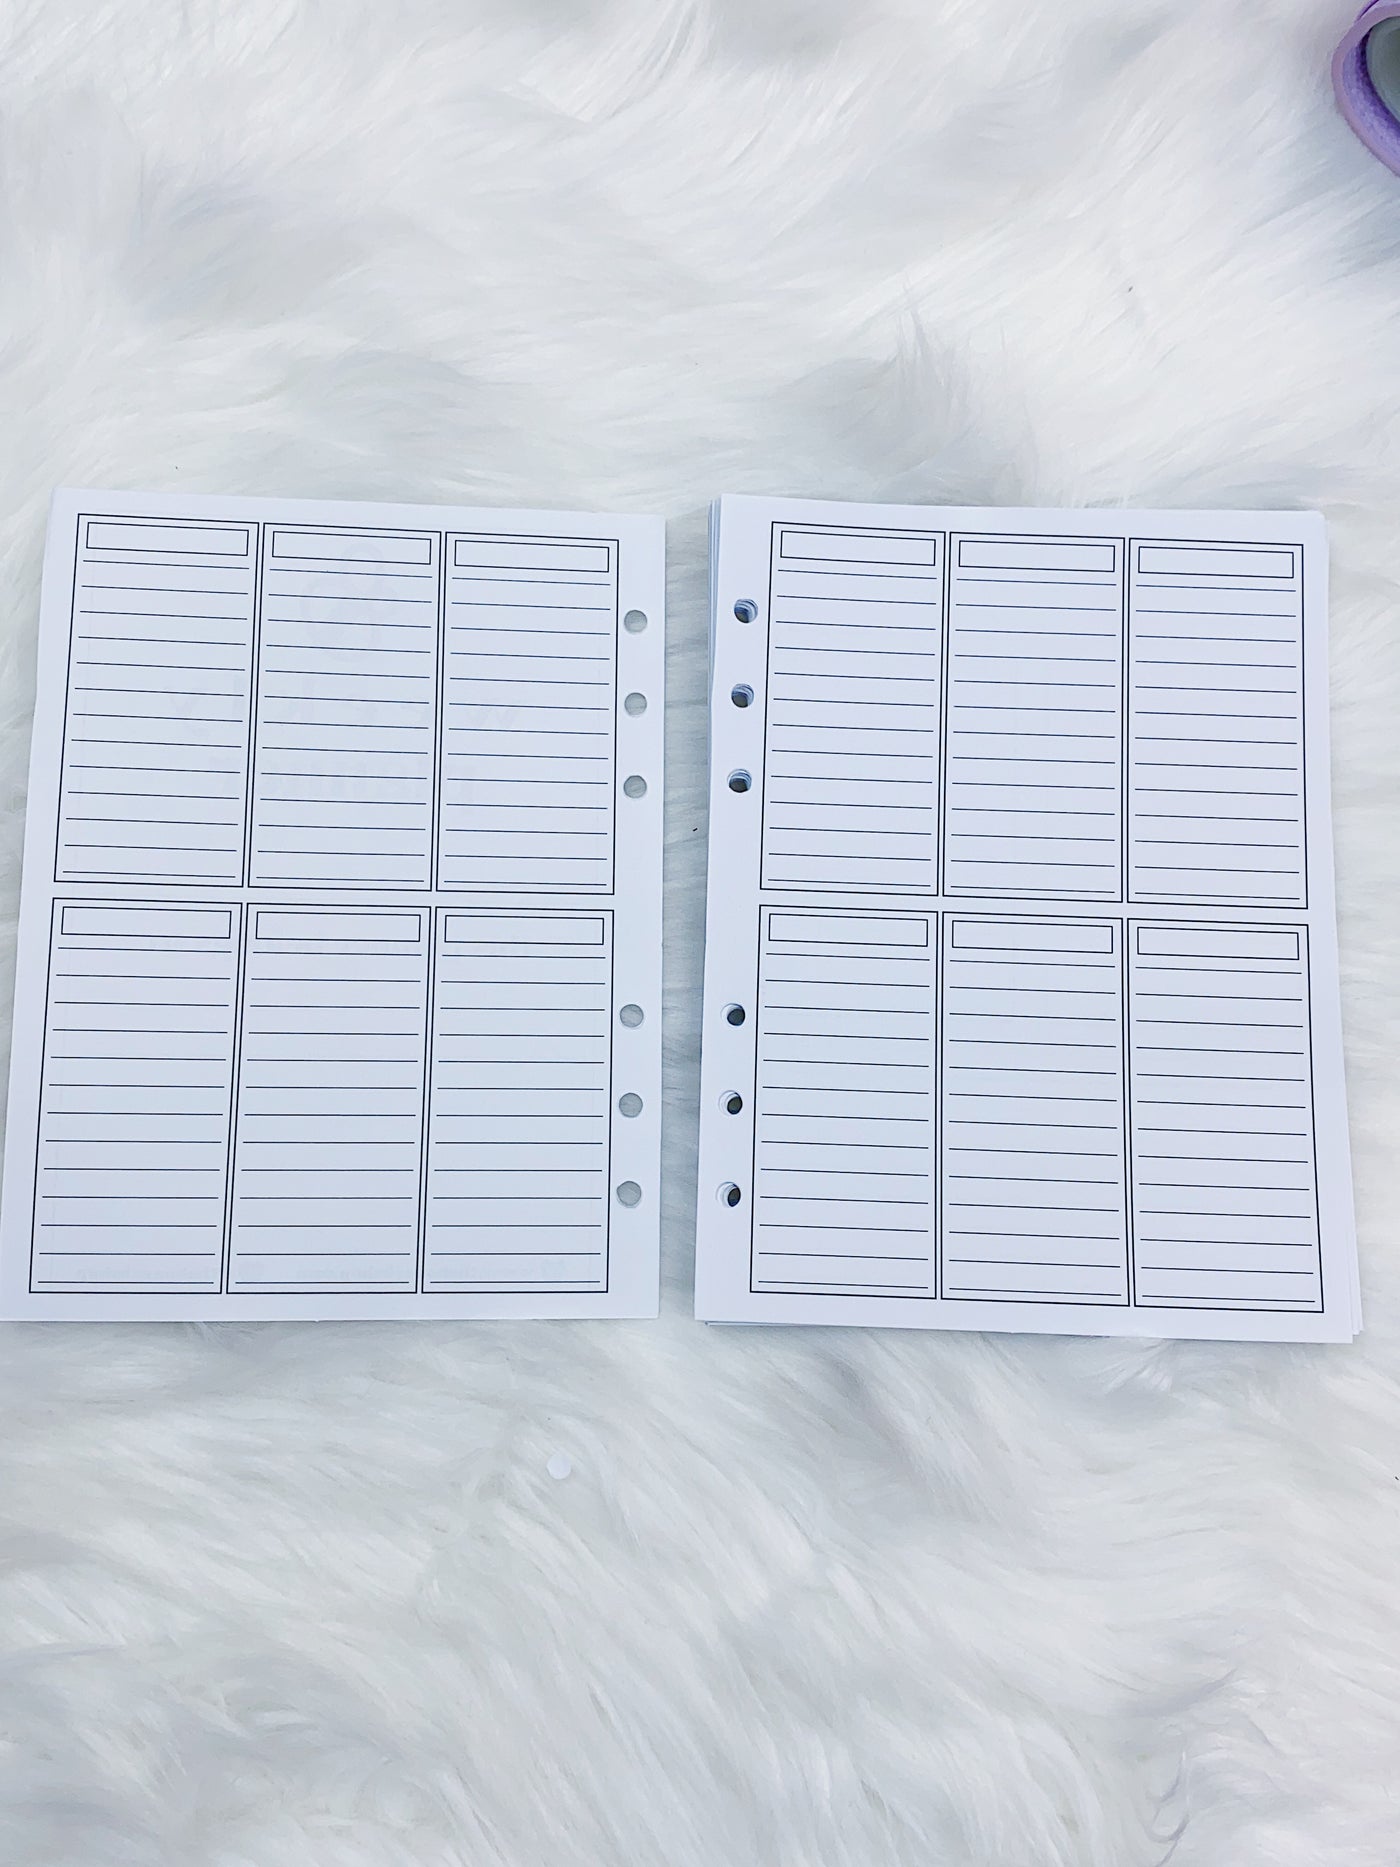 Vertical Weekly + Monthly B6 Rings Planner | Includes 6 Months!